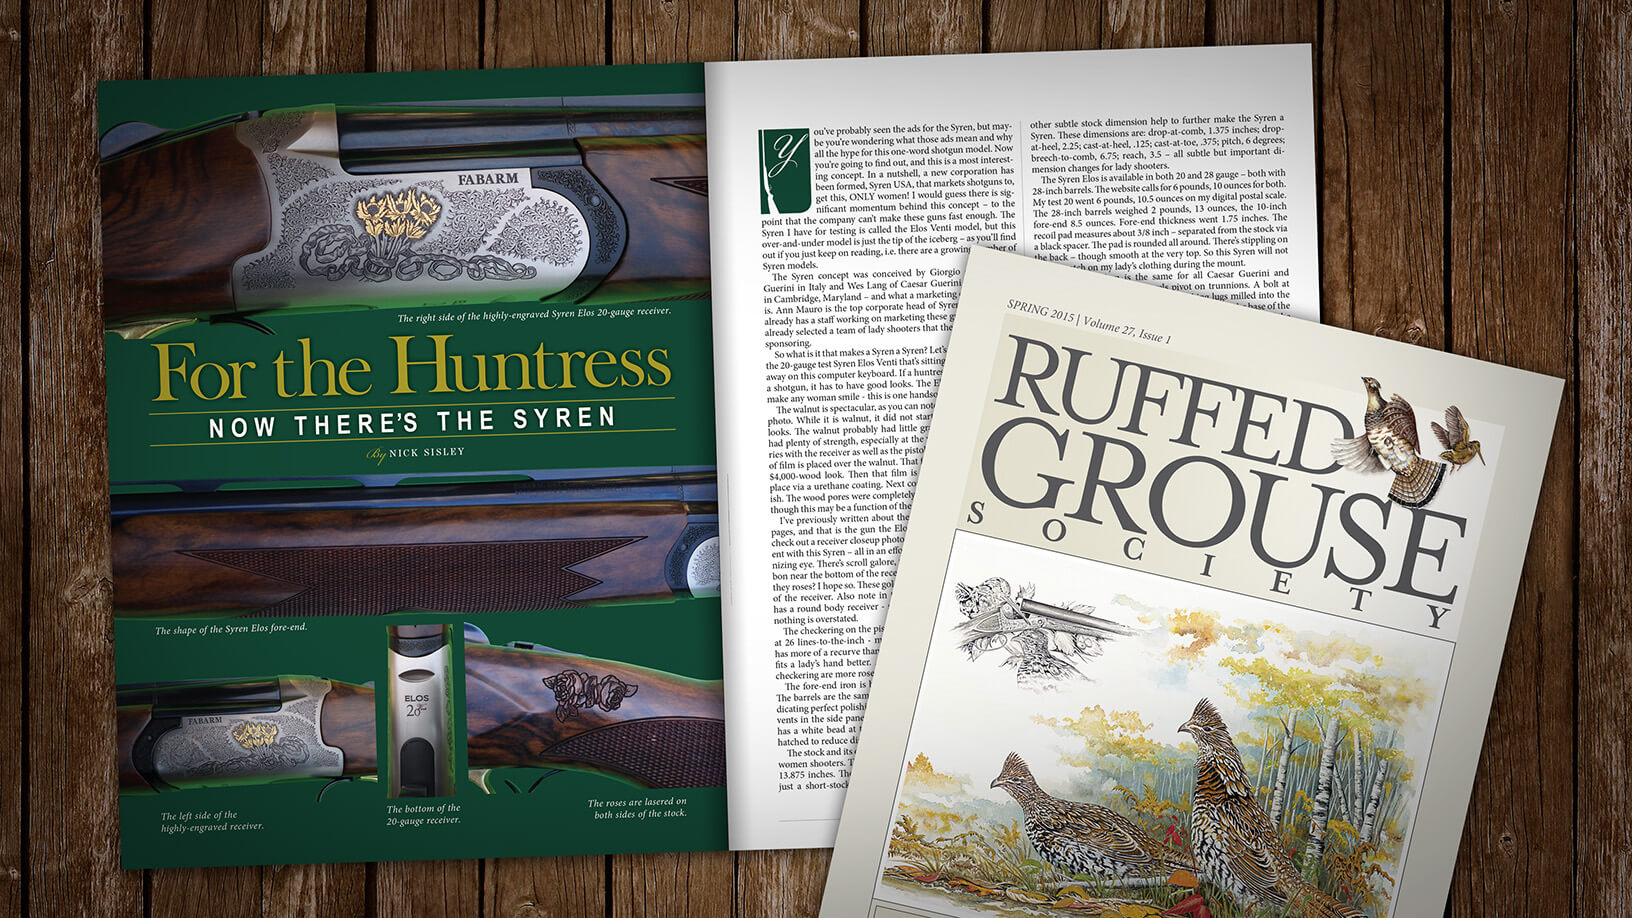 [Ruffed Grouse Society 03.15] For the Huntress, Now there’s the Syren